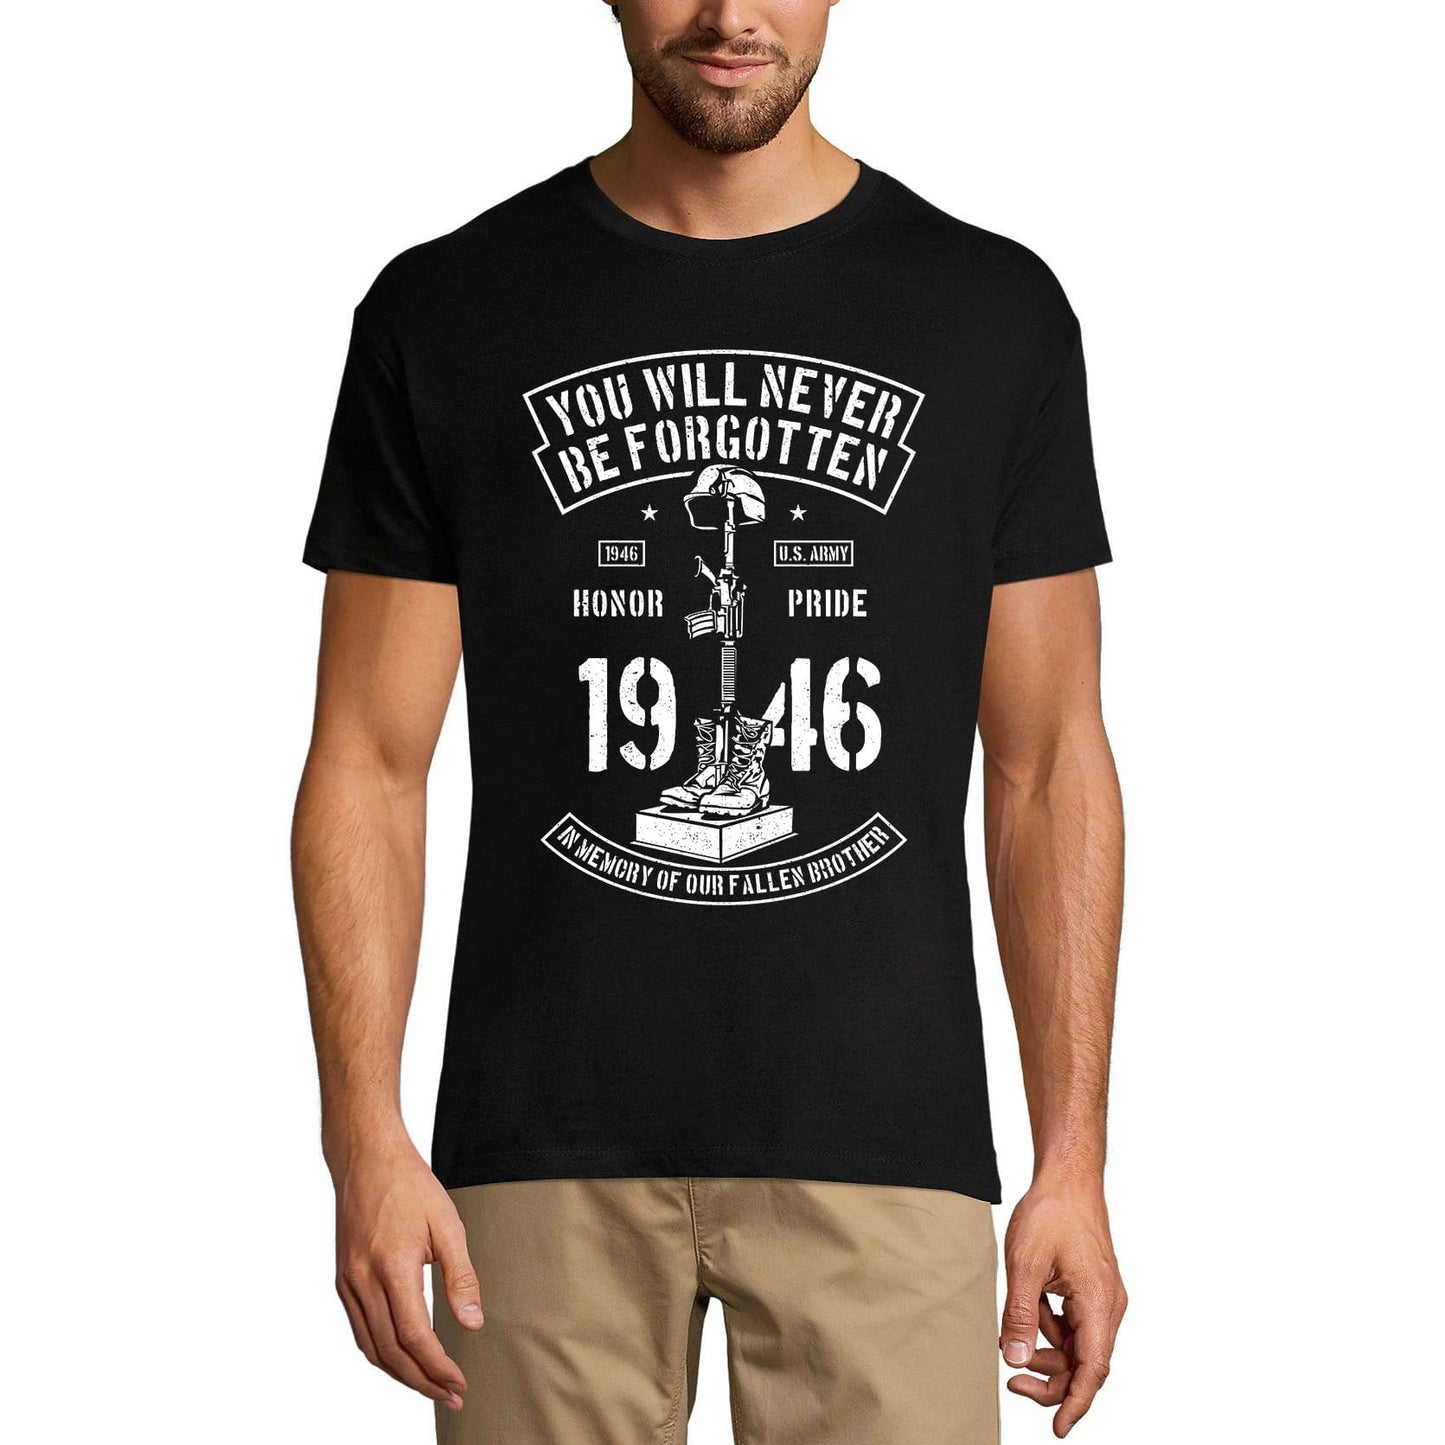 ULTRABASIC Men's T-Shirt You Will Never Be Forgotten - US Army 1946 Honor Pride Tee Shirt